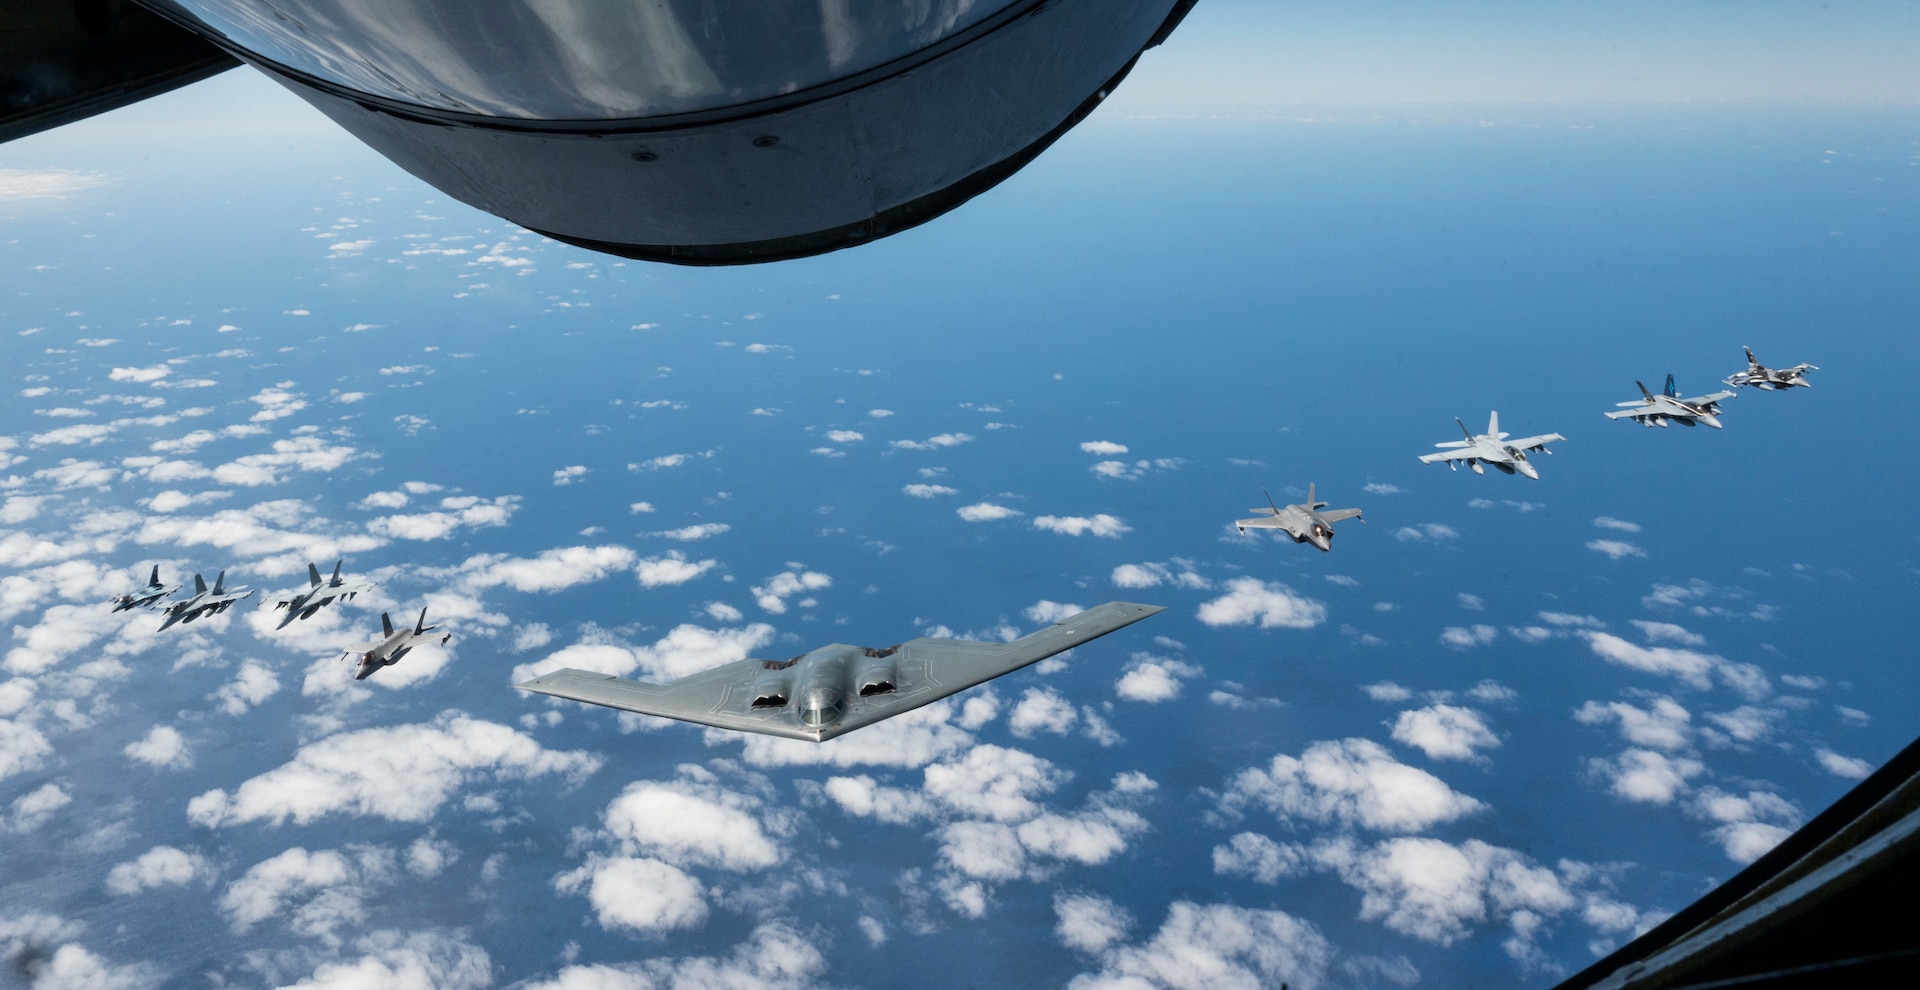 A U.S. Air force B-2 Spirit from Whiteman Air Force Base, Missouri, flies in formation with two Royal Australian Air Force F-35A Lightning IIs, two RAAF F/A-18F Super Hornets, two RAAF EA-18 Growlers, and two U.S. Air Force F-16C Aggressors from Eielson Air Force Base, Alaska during a training mission in the Indo-Pacific region, March 23, 2022. Once in Australian airspace, the B-2 crews from the 509th Bomb Wing teamed up with a KC-135 Stratotanker from the Alaska Air National Guard to complete aerial refueling before integrating with the eight fighter aircraft. (U.S. Air Force photo by Tech. Sgt. Hailey Haux)